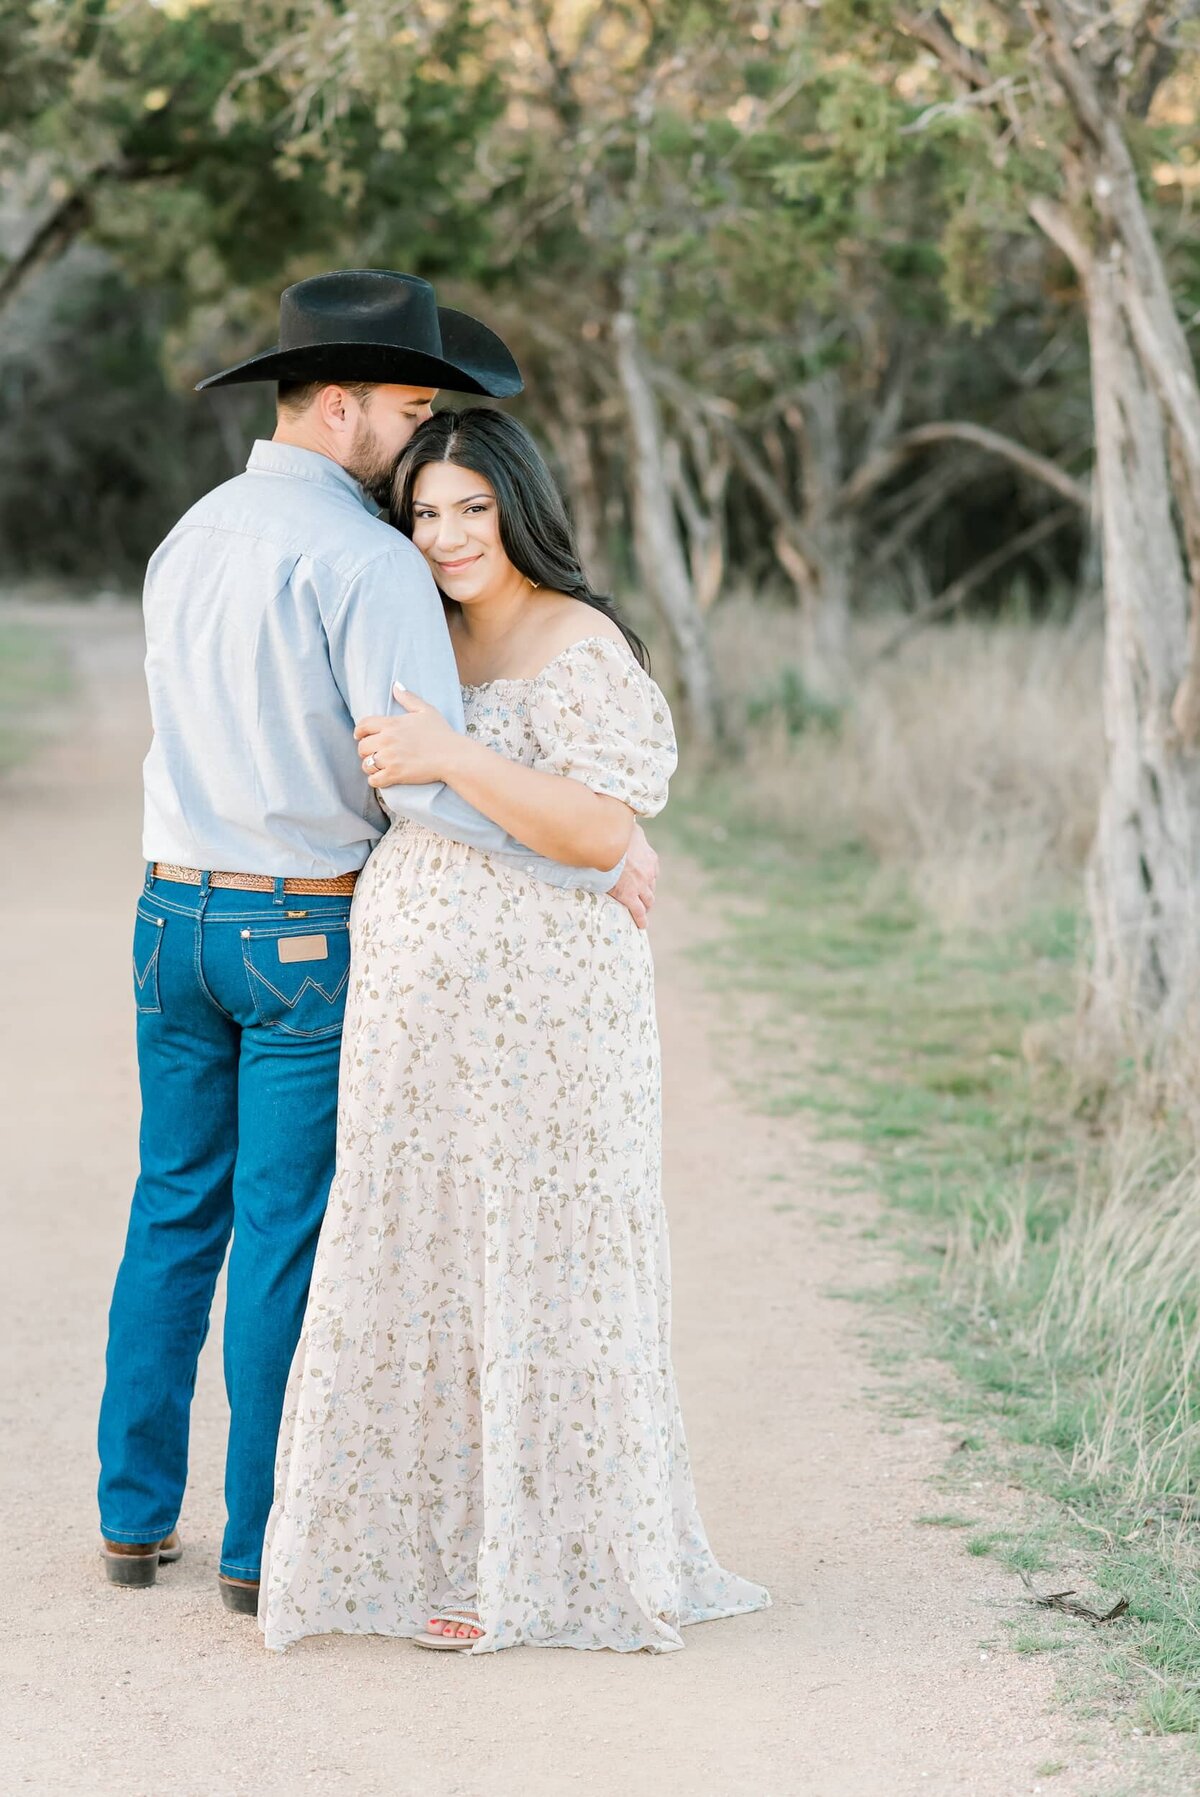 San-Antonio-Maternity-Photography-3.4.23- Melanie_s Maternity Session- Laurie Adalle Photography-56